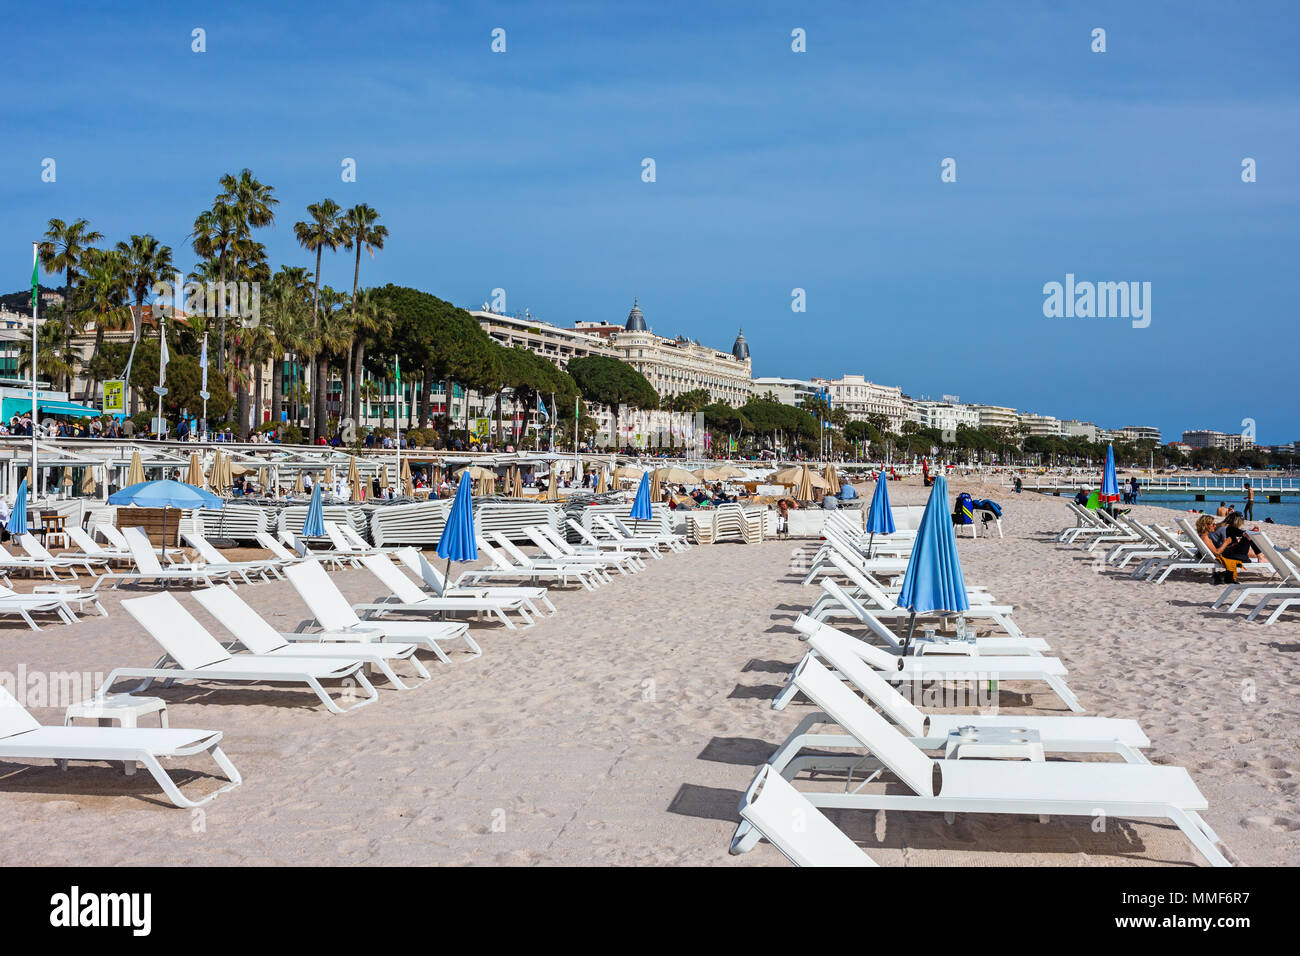 France, Cannes city, beach with sun loungers on French Riviera at Mediterranean Sea, buildings along Boulevard de la Croisette Stock Photo